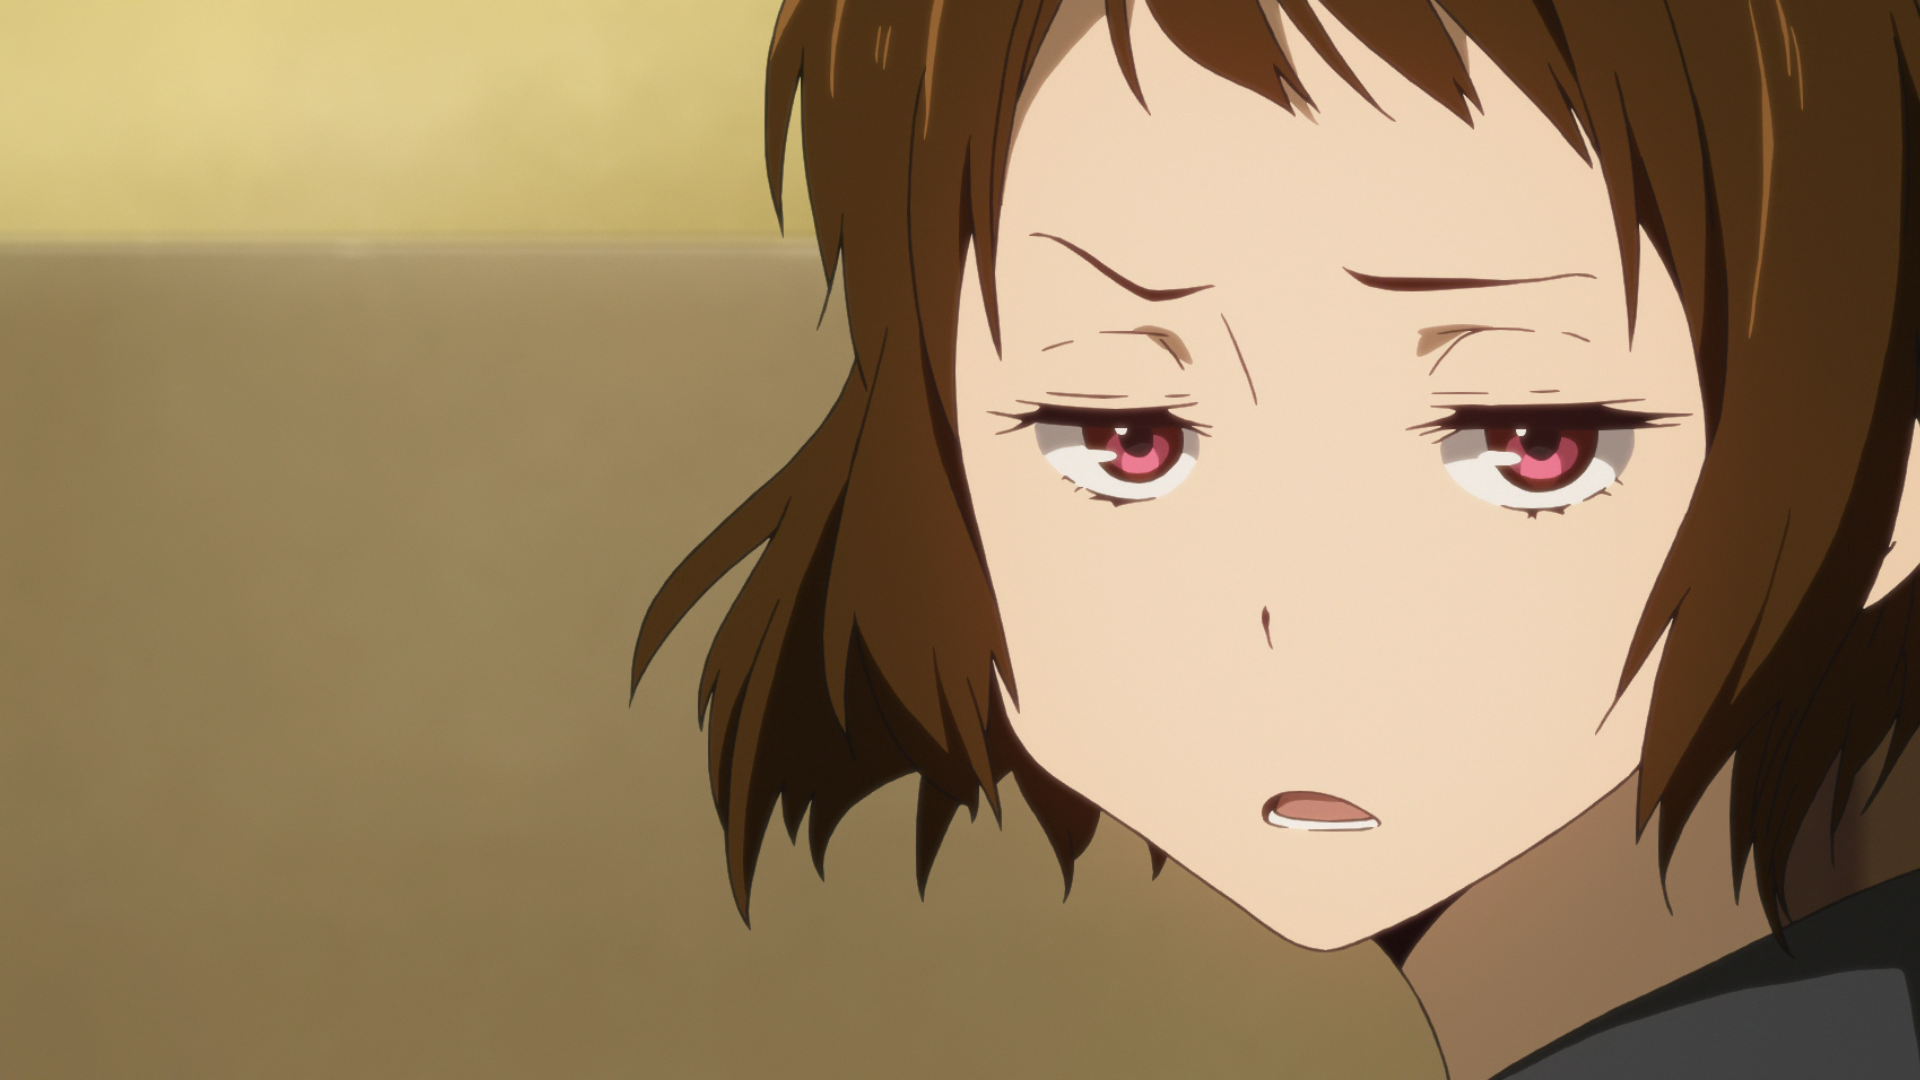 Sad Disappointed Anime Face Super funny anime expressions faces 58